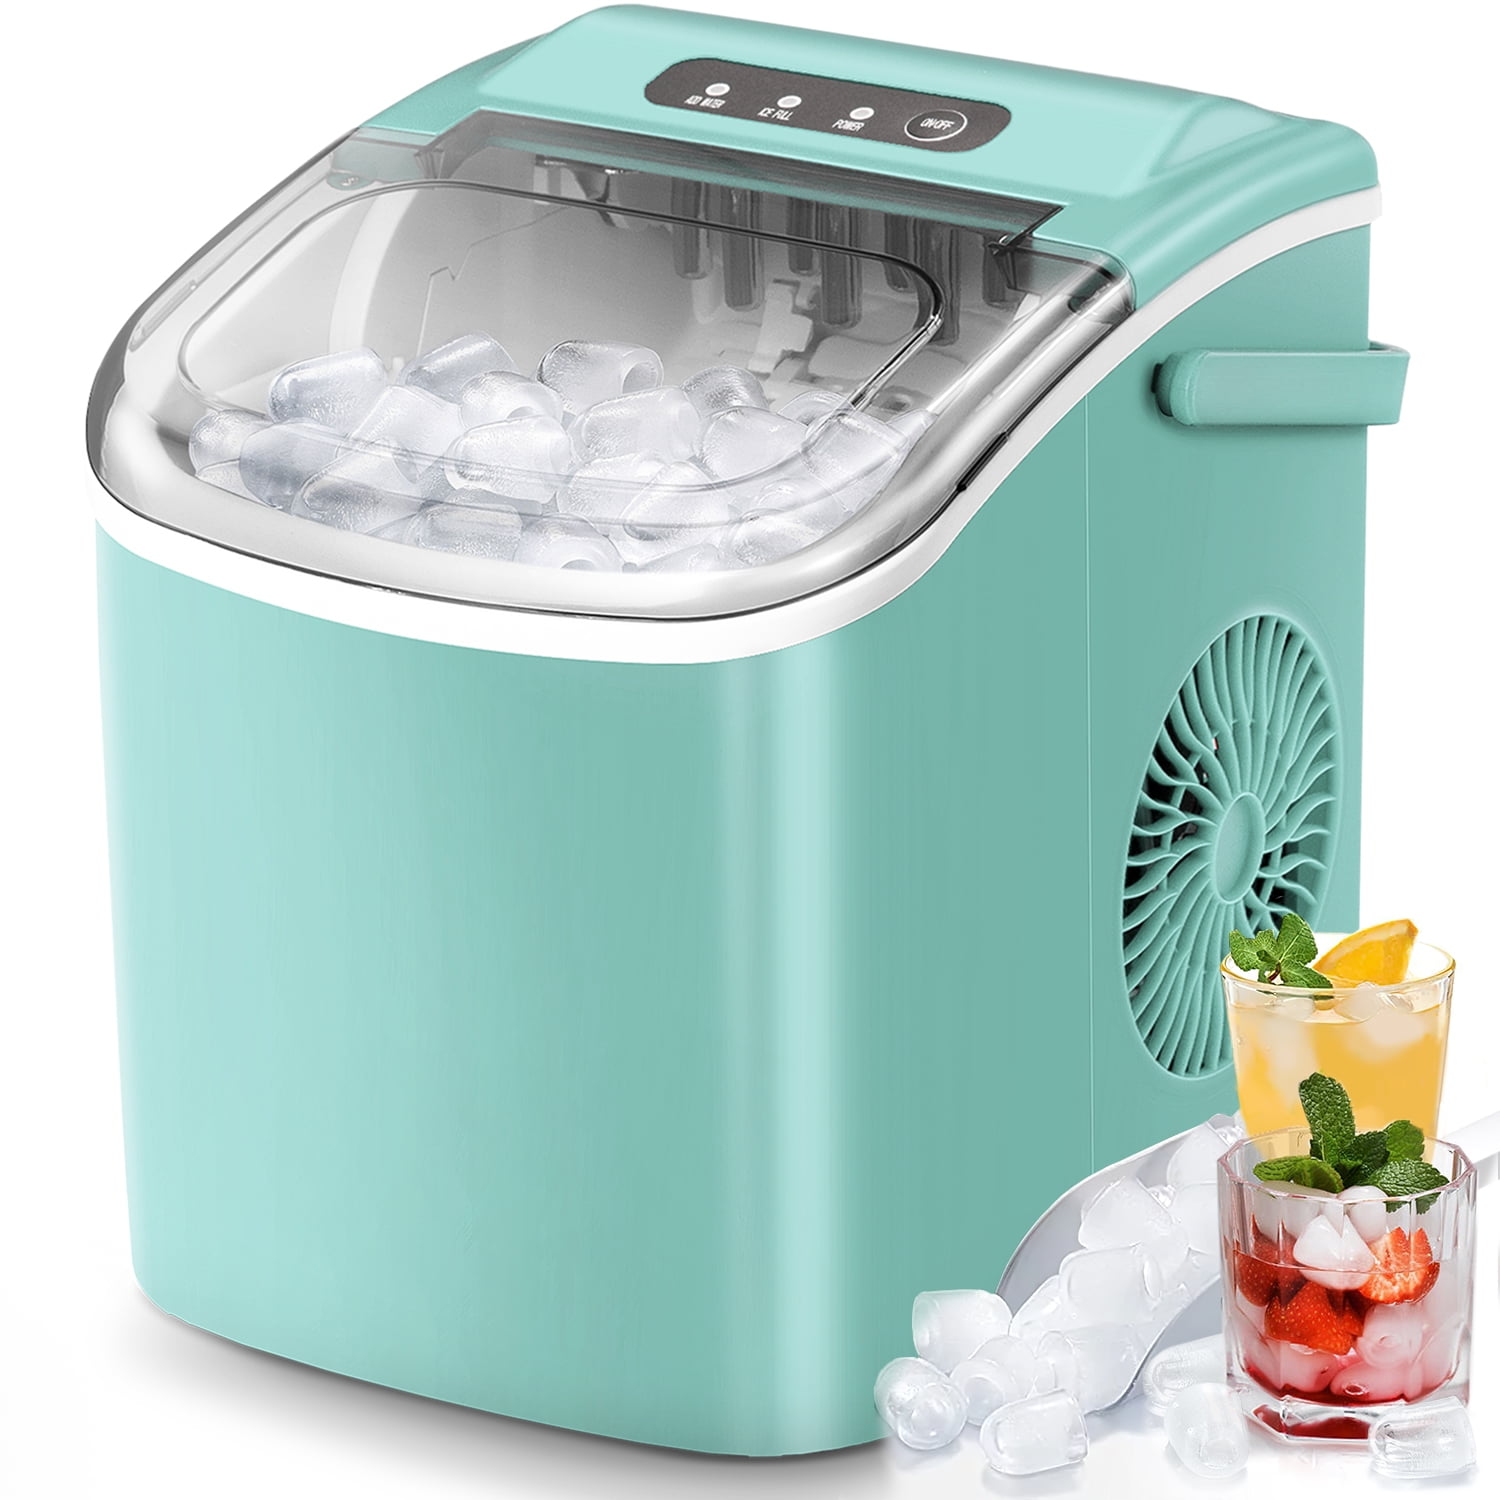 Kismile Countertop Ice Maker, Self-Cleaning Portable Ice Maker Machine with Handle, 9 Bullet-Shaped Ice Cubes Ready in 6 Mins, 26LBS/24H with Ice